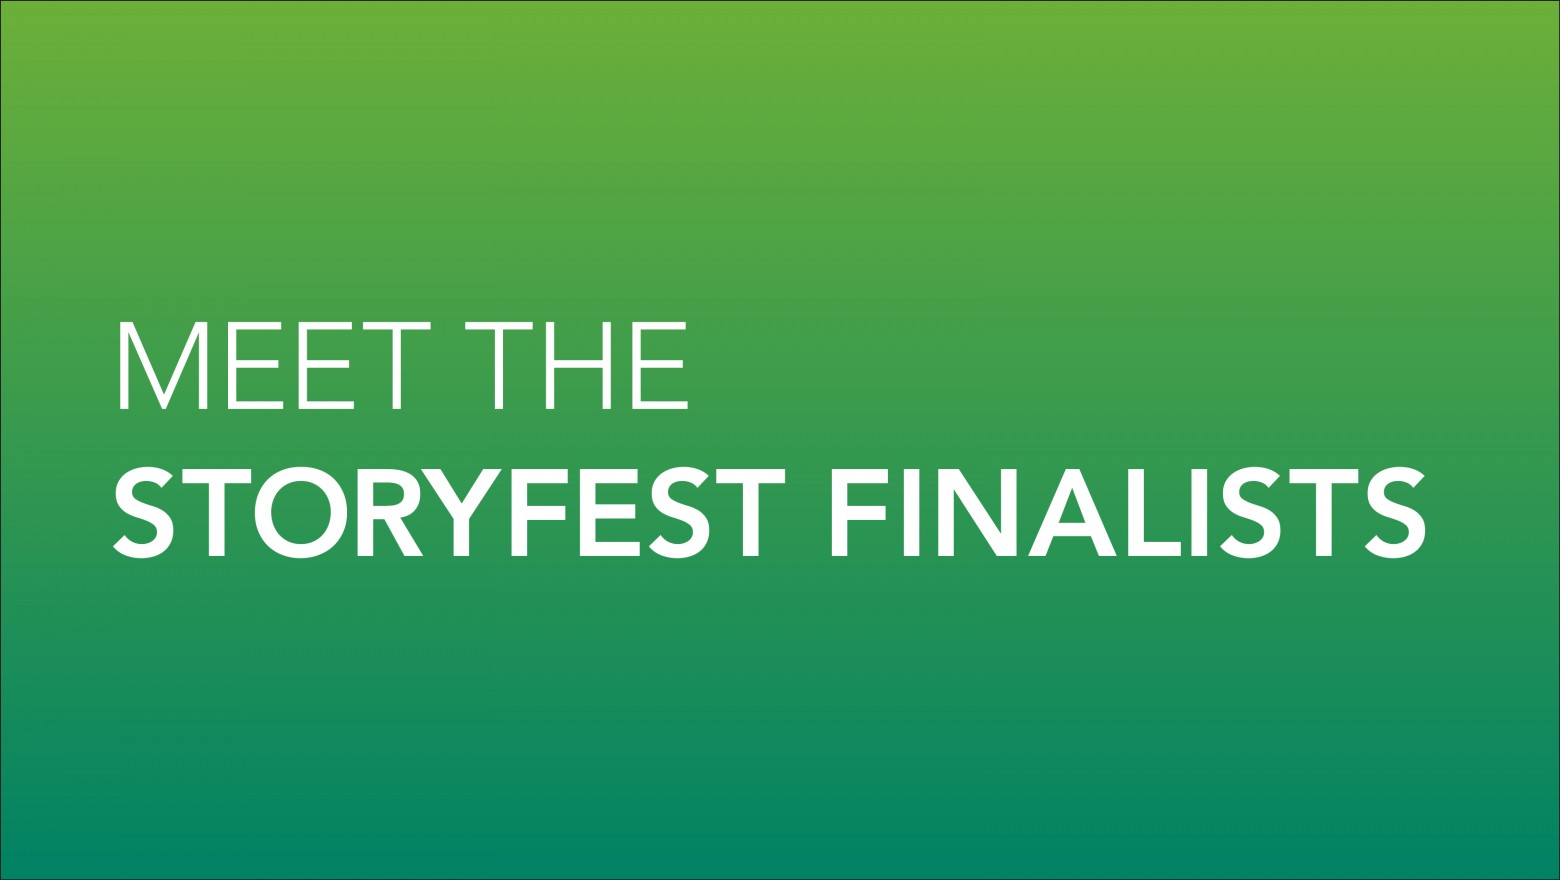 Meet the Storyfest finalists: Visionary